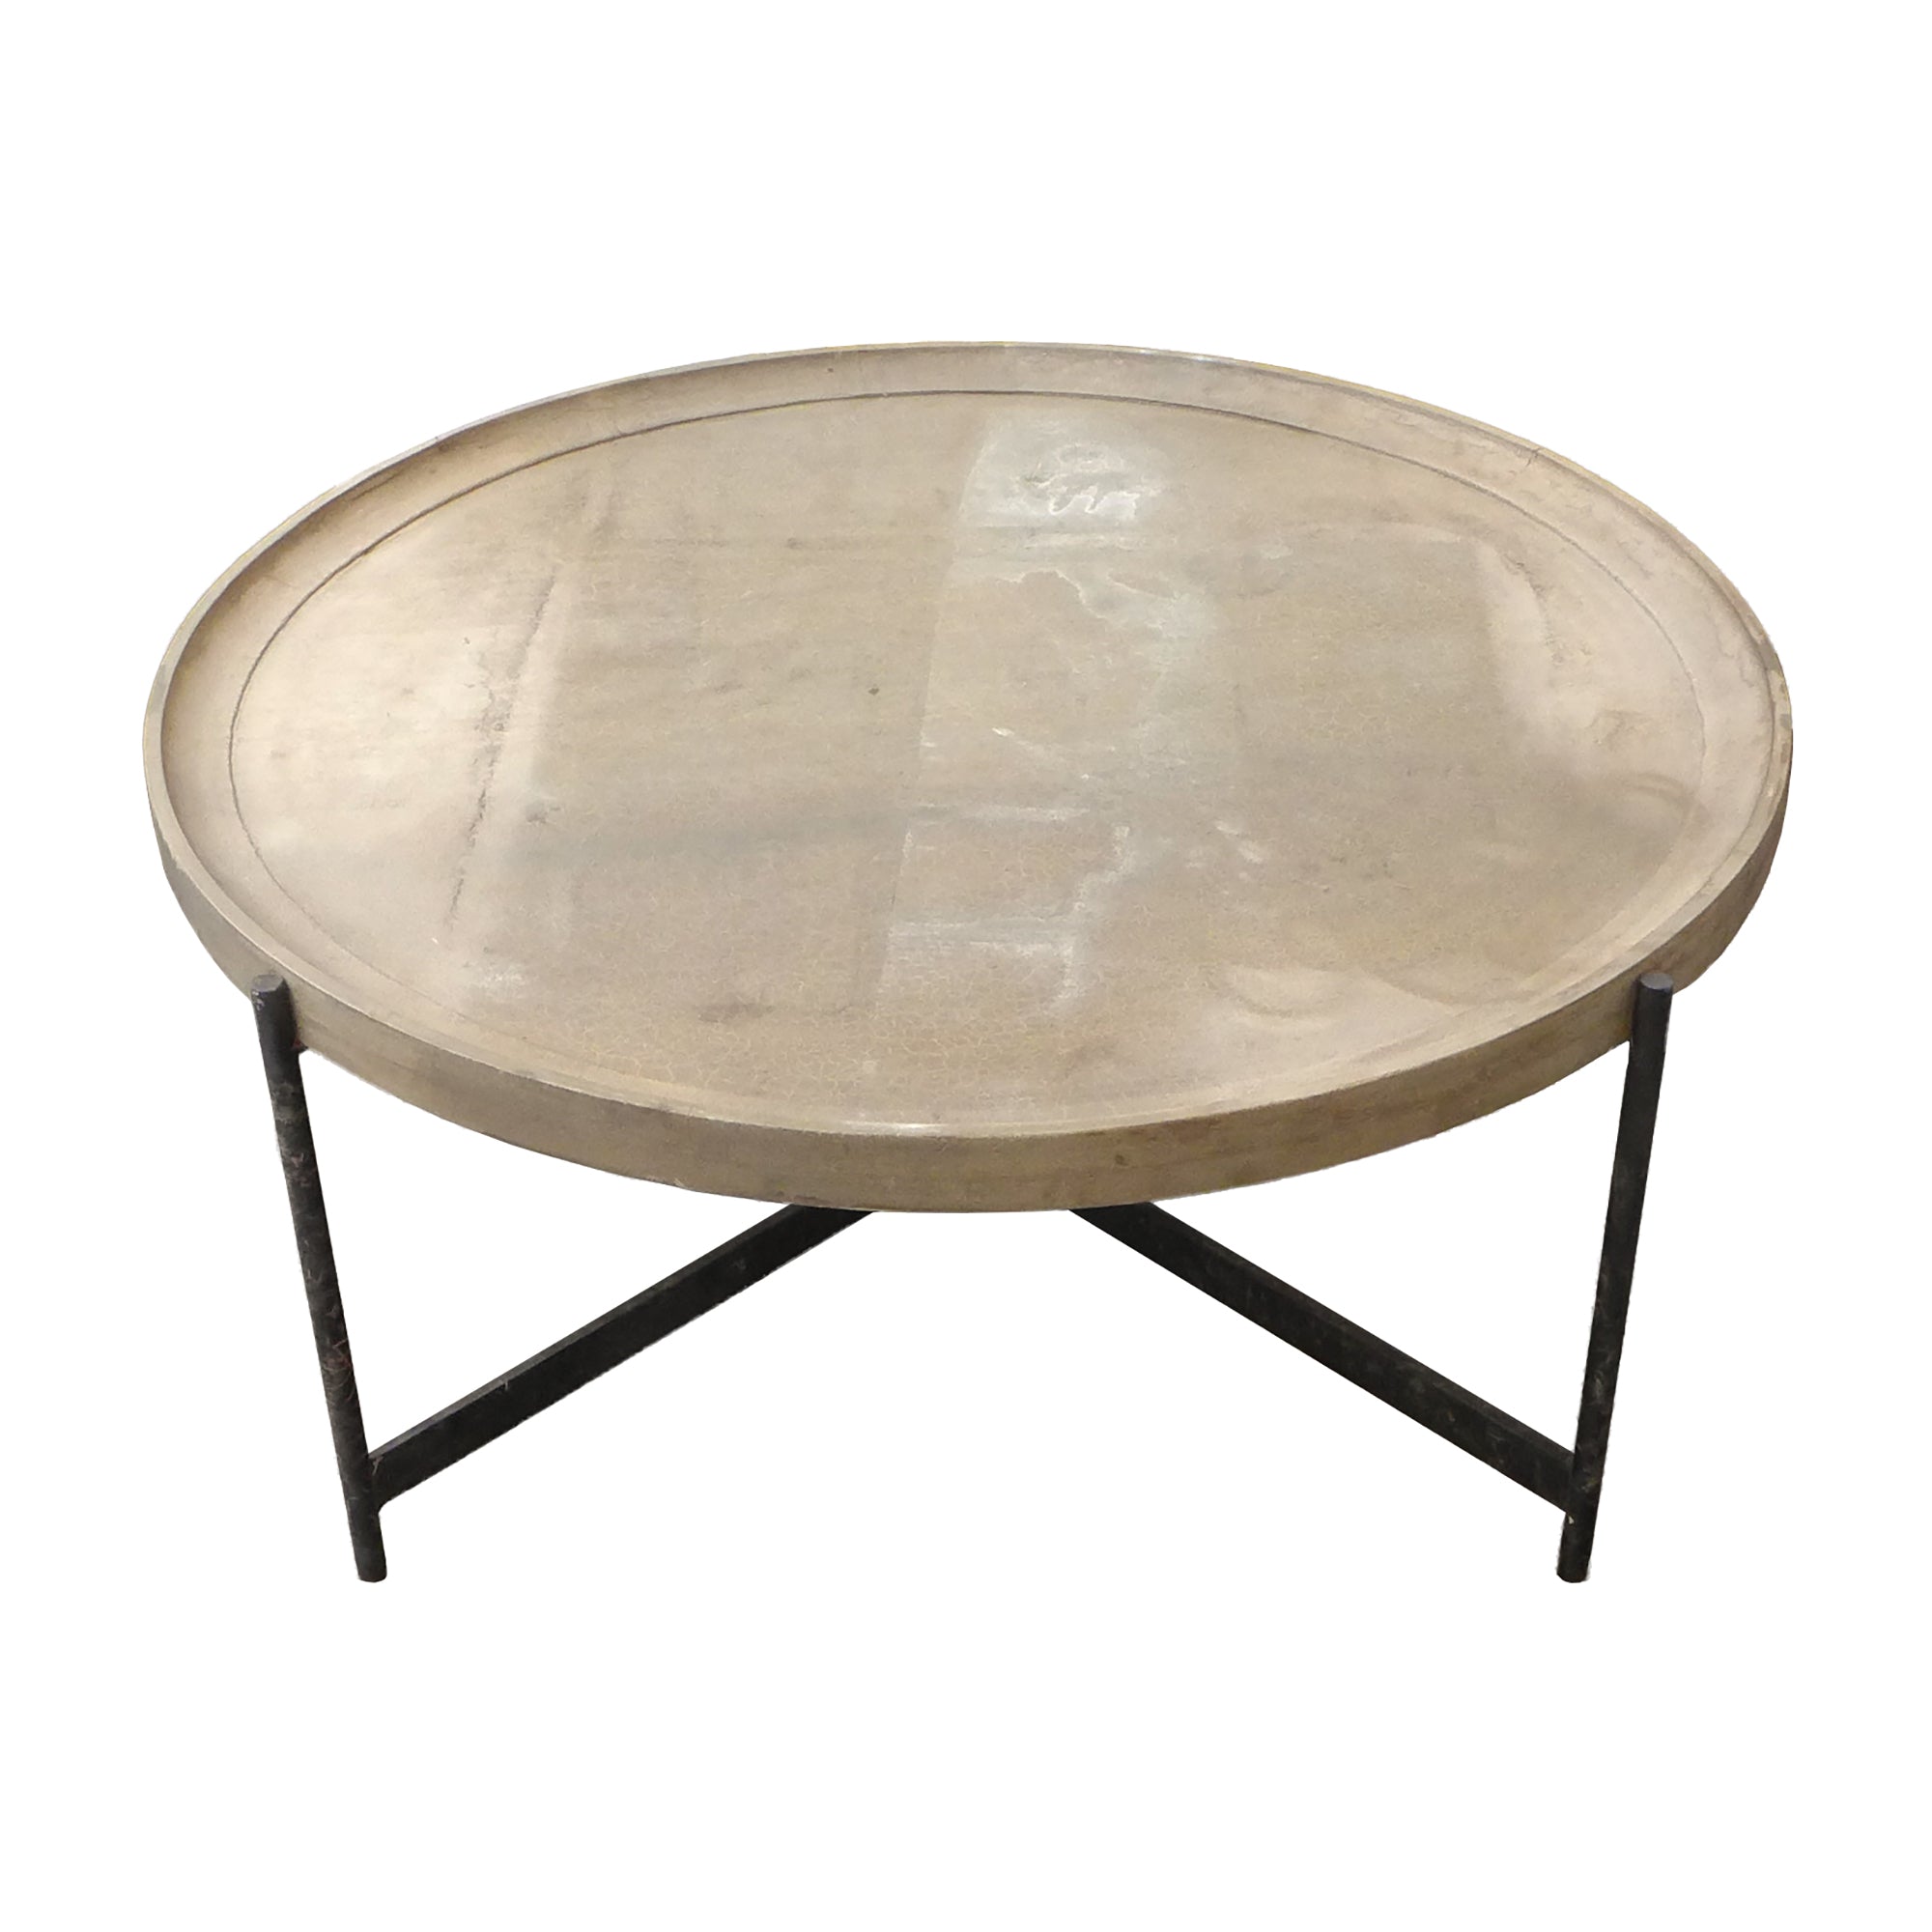 Steel & Aerated Concrete Round Coffee Table